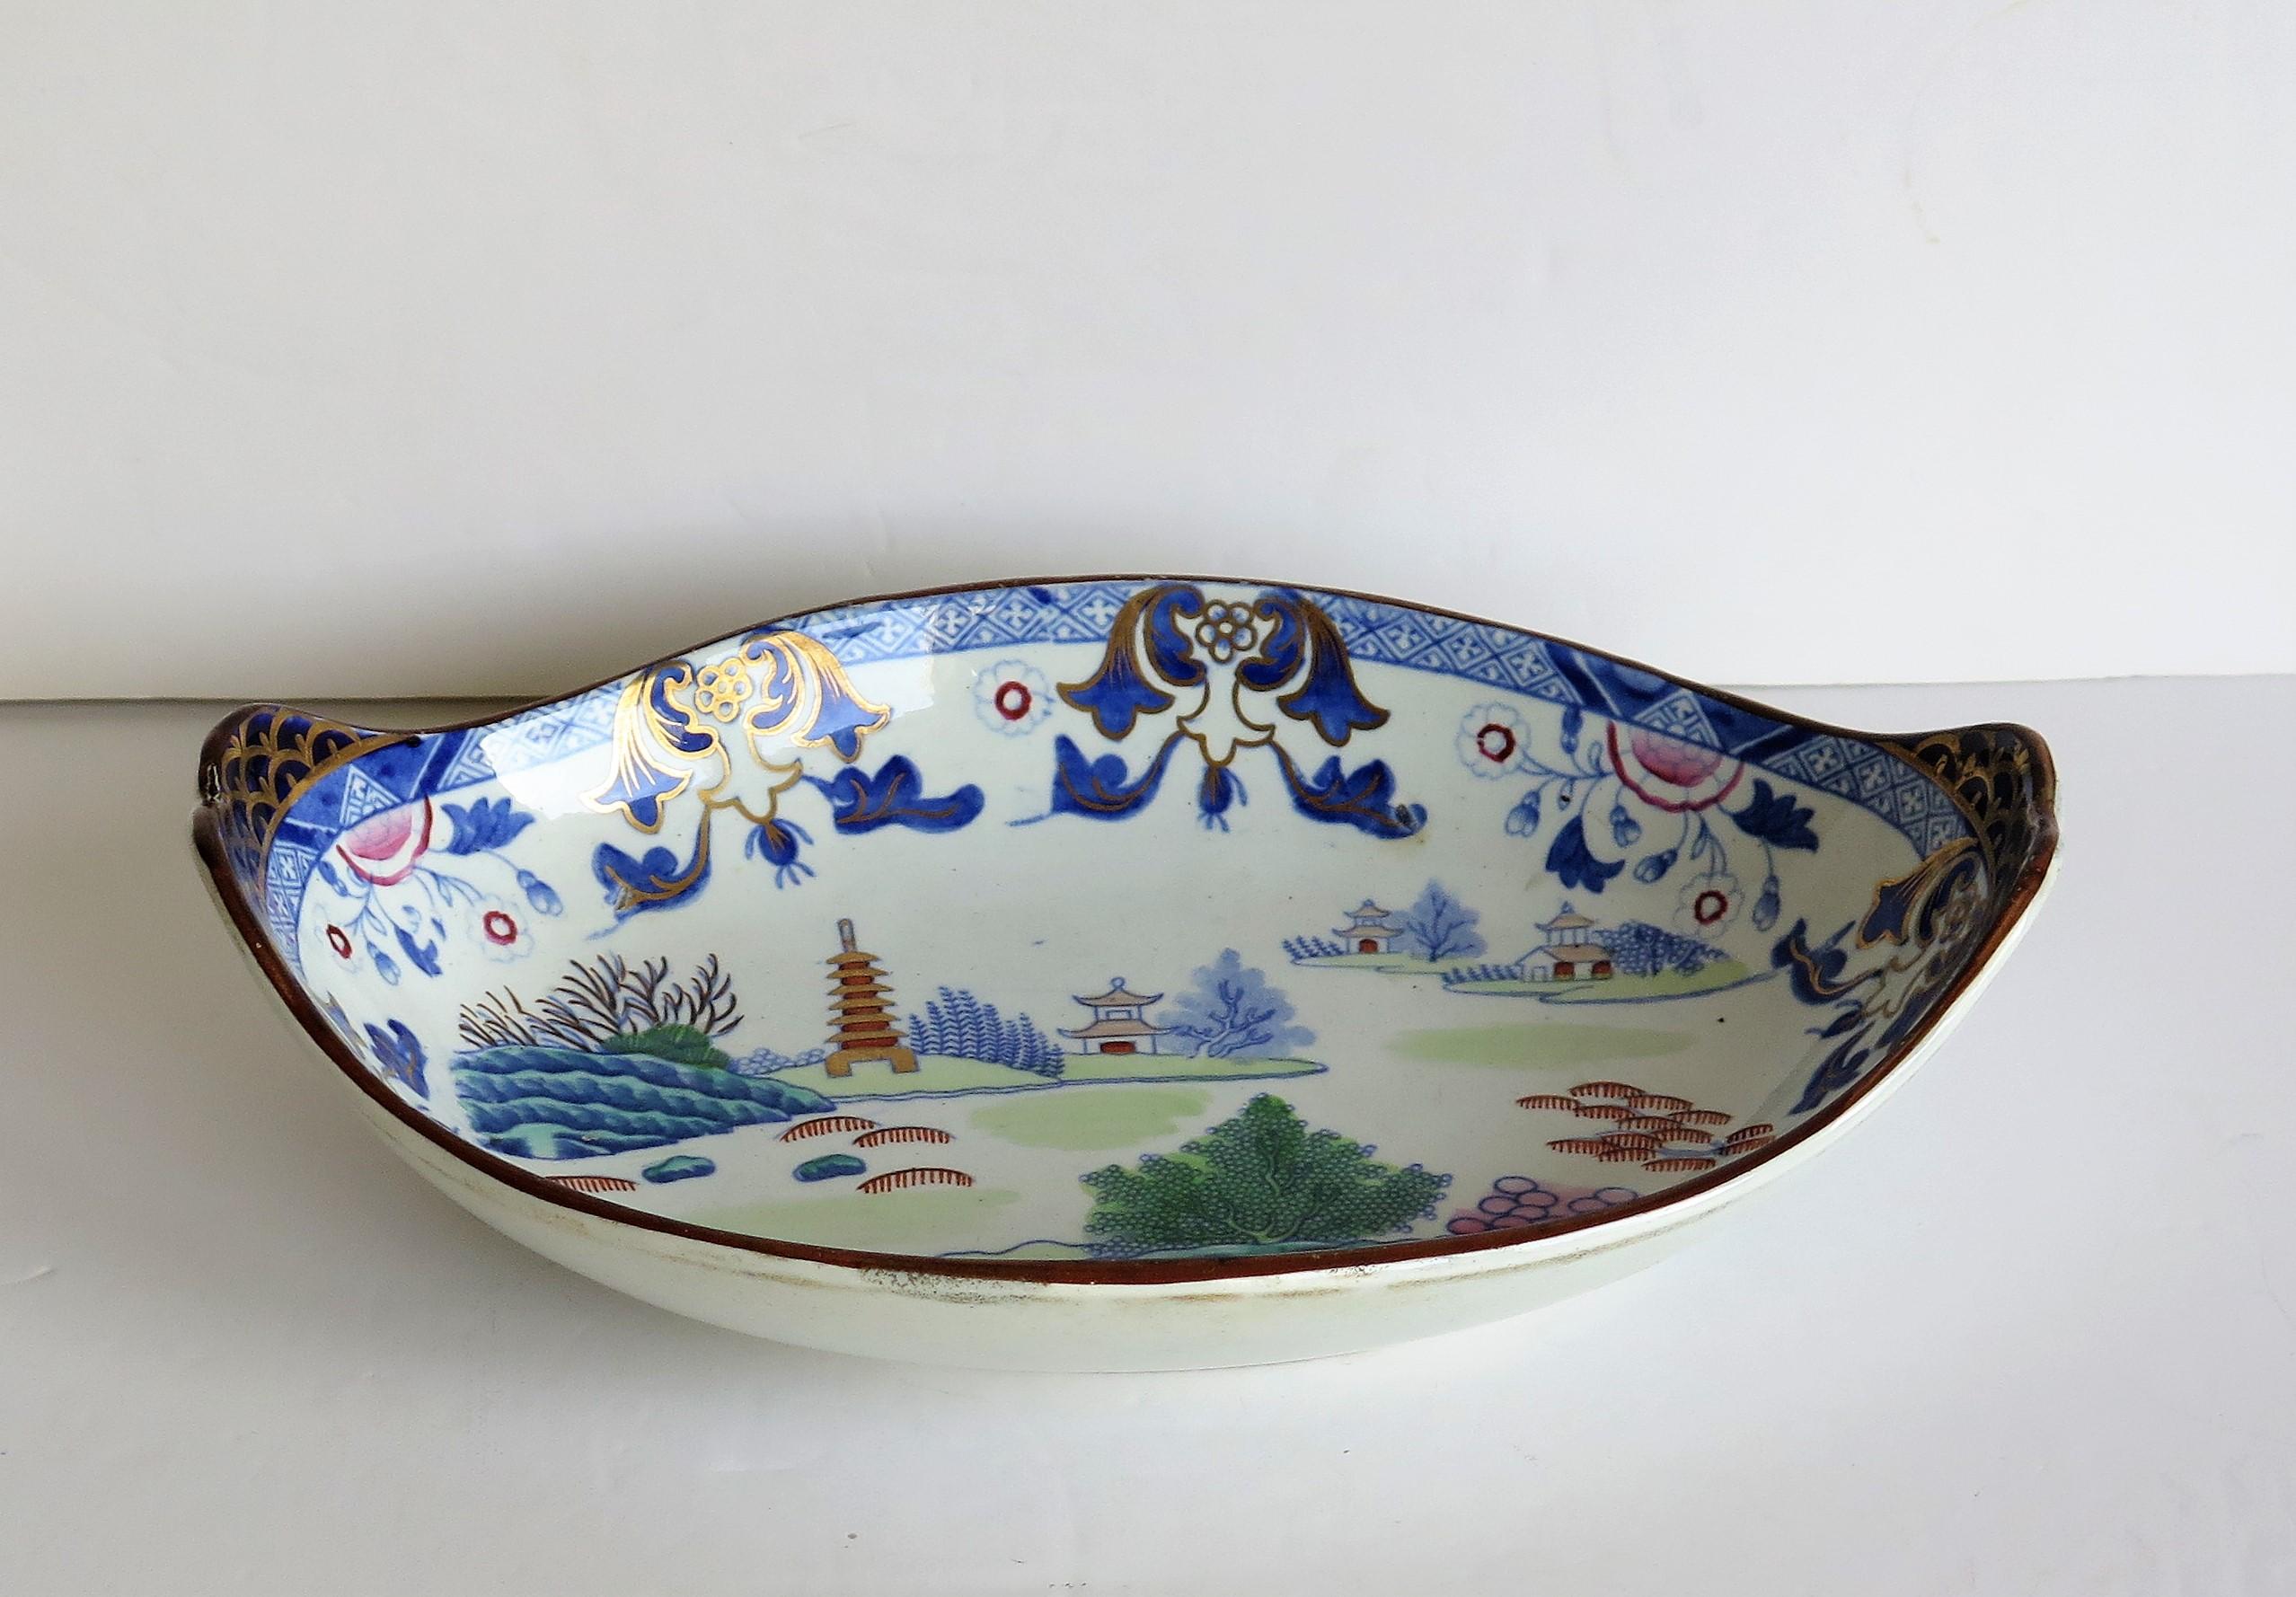 Chinoiserie Georgian Ironstone Dish by Hicks & Meigh in Chinese Landscape Pattern circa 1818 For Sale